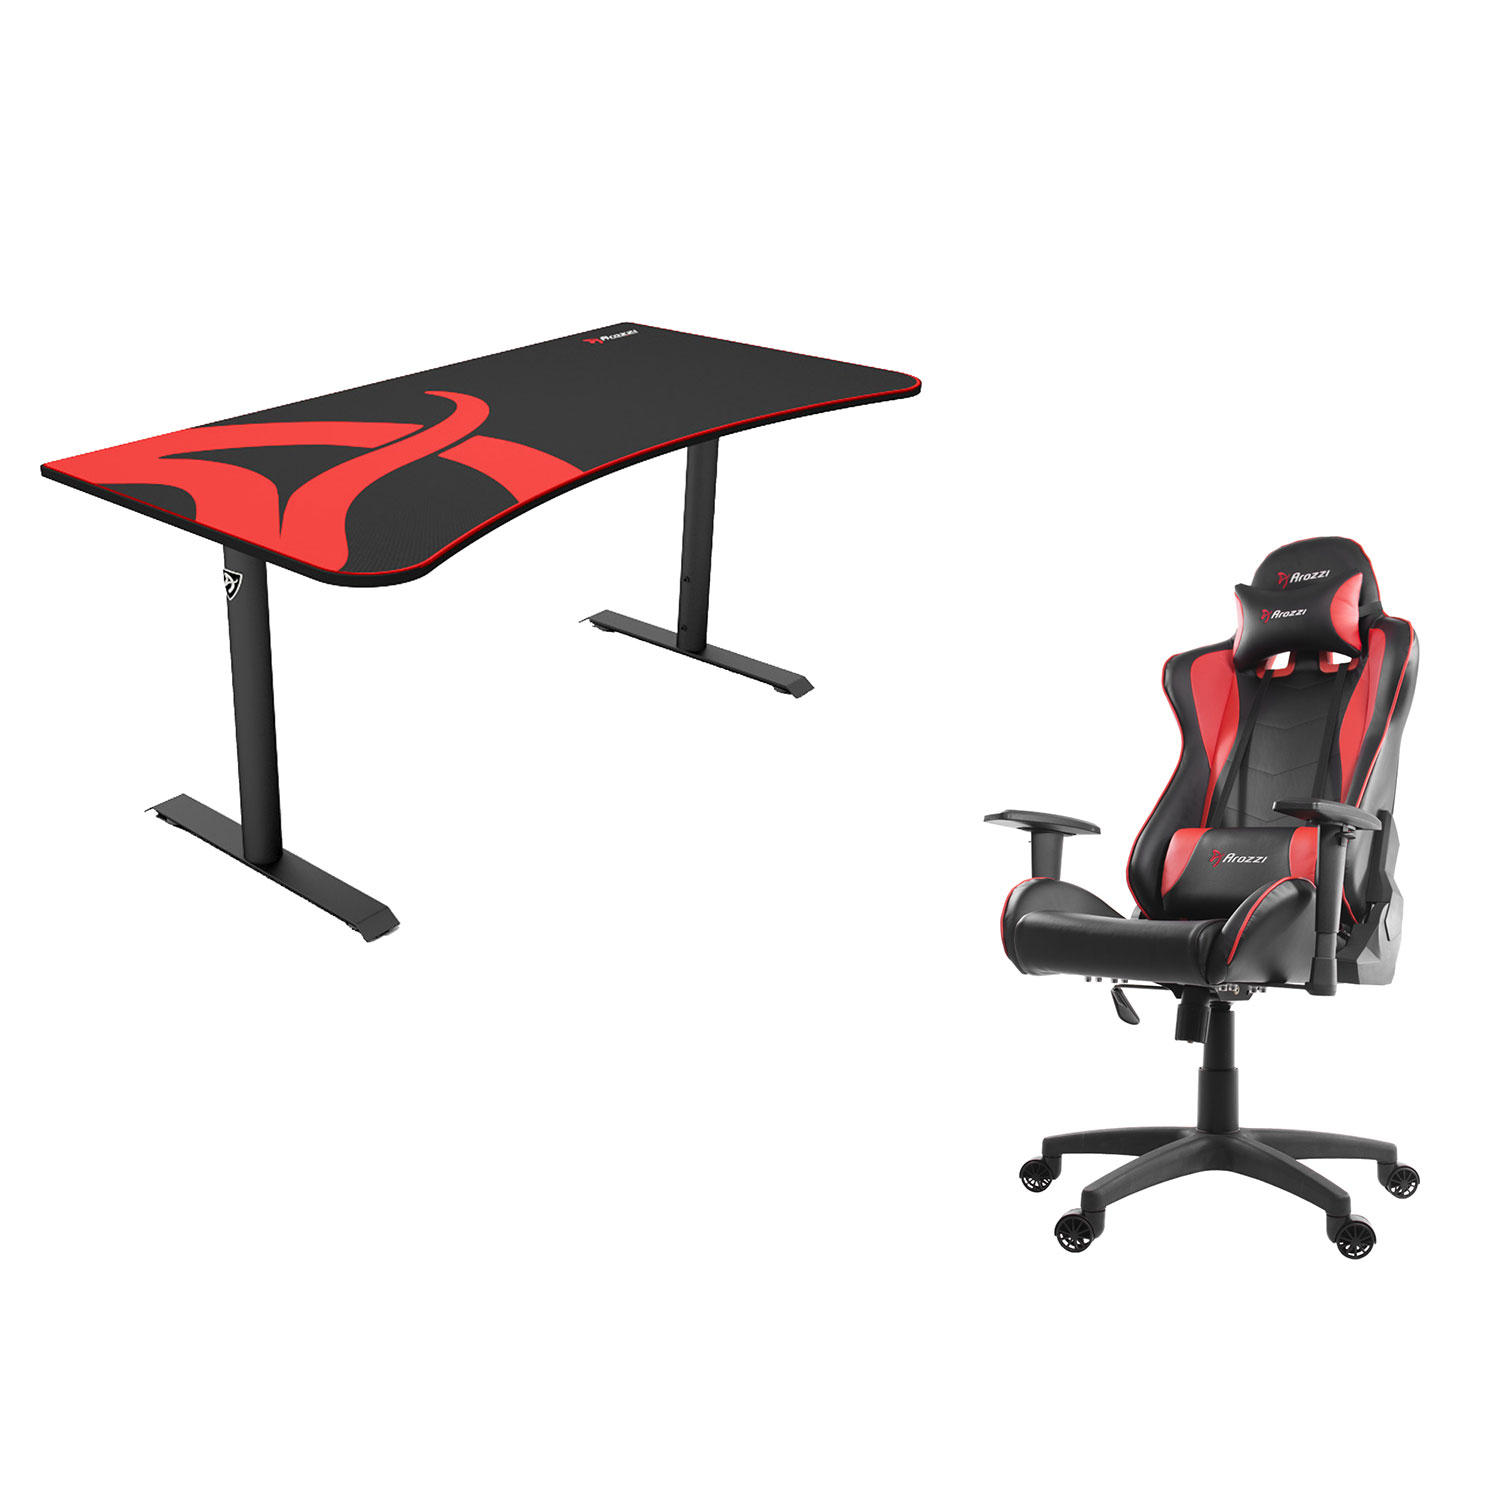 Arena Gaming Desk and Forte Gaming Chair